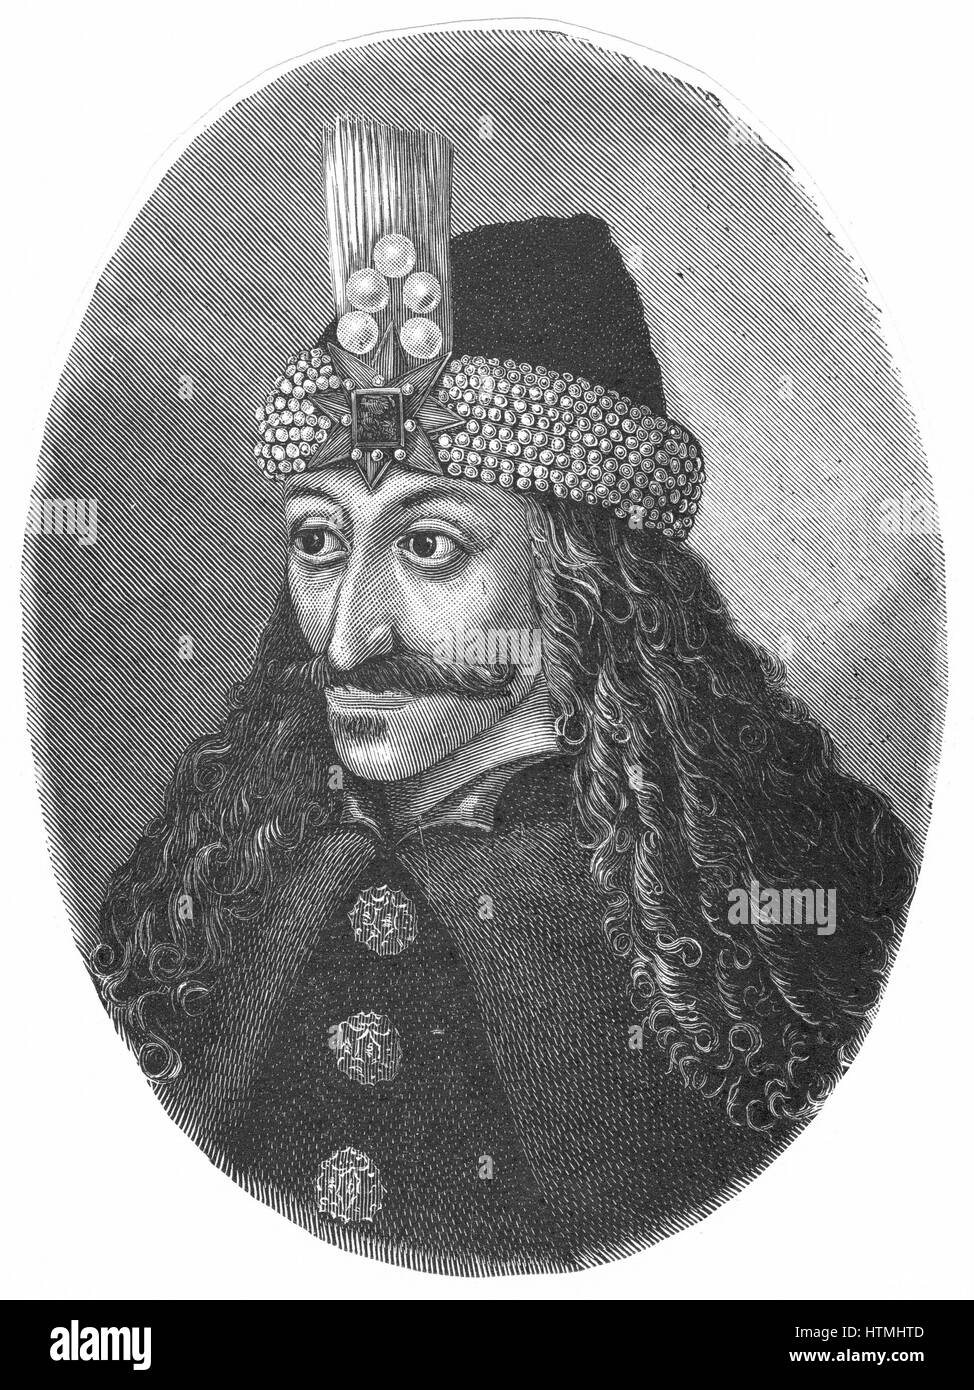 Vlad Tepes (Vlad IV, The Impaler) Ruler of Walachia 1456-62, 1476-77. Apparently the source of the Dracula of Translyvanian legend as Vlad member of Order of the Dragon (dracul). Engraving Stock Photo